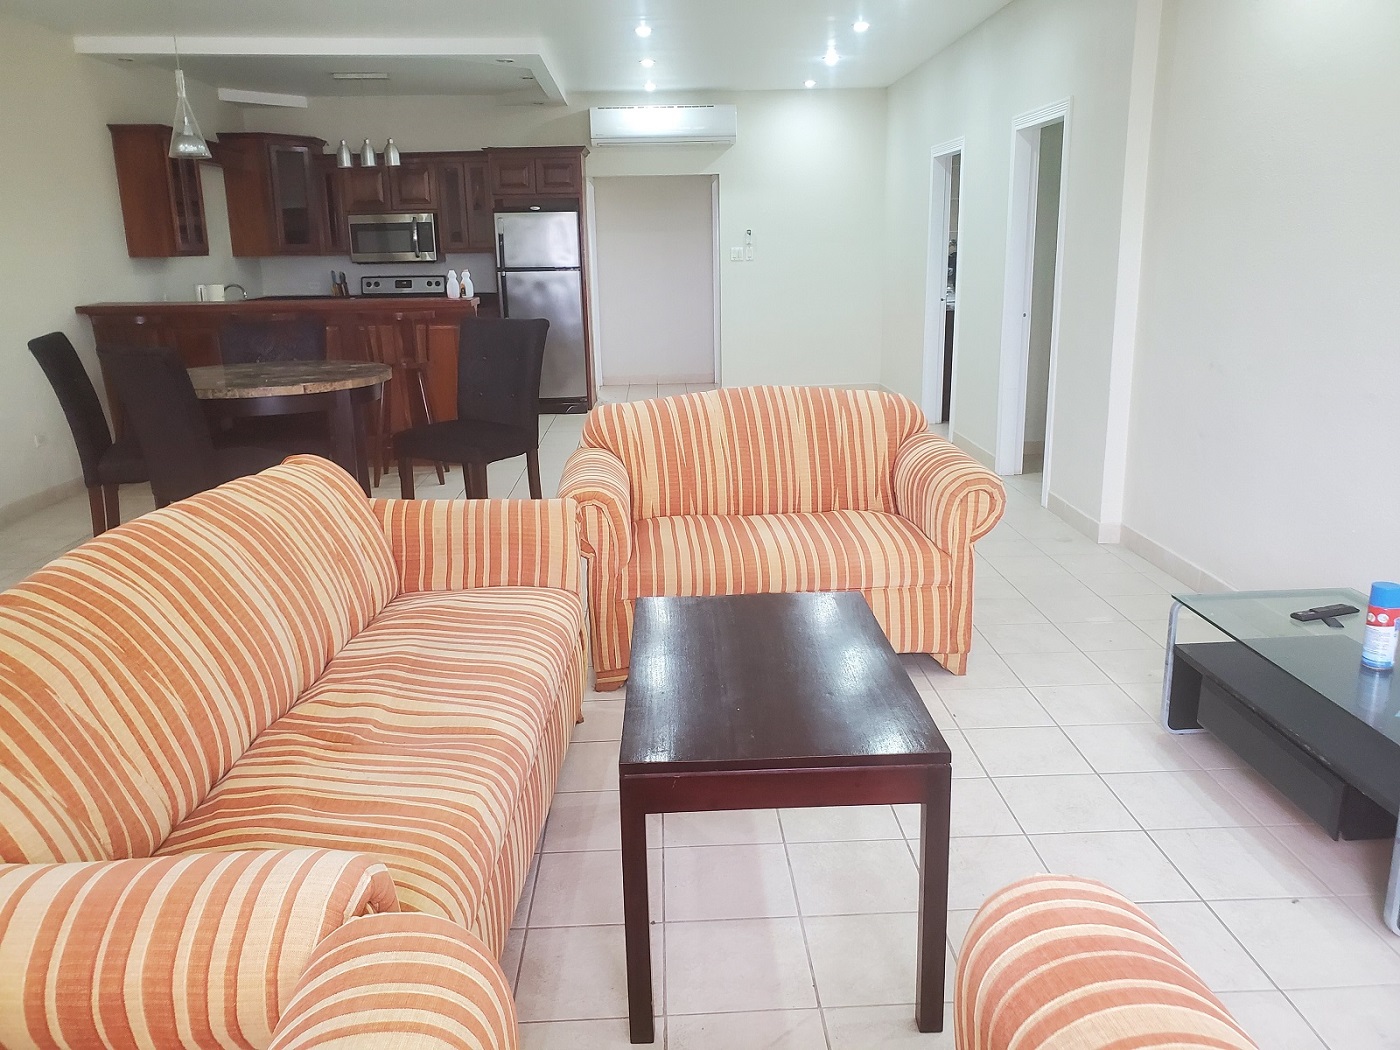 2 bed 1 bath apartment for rent in Belize City